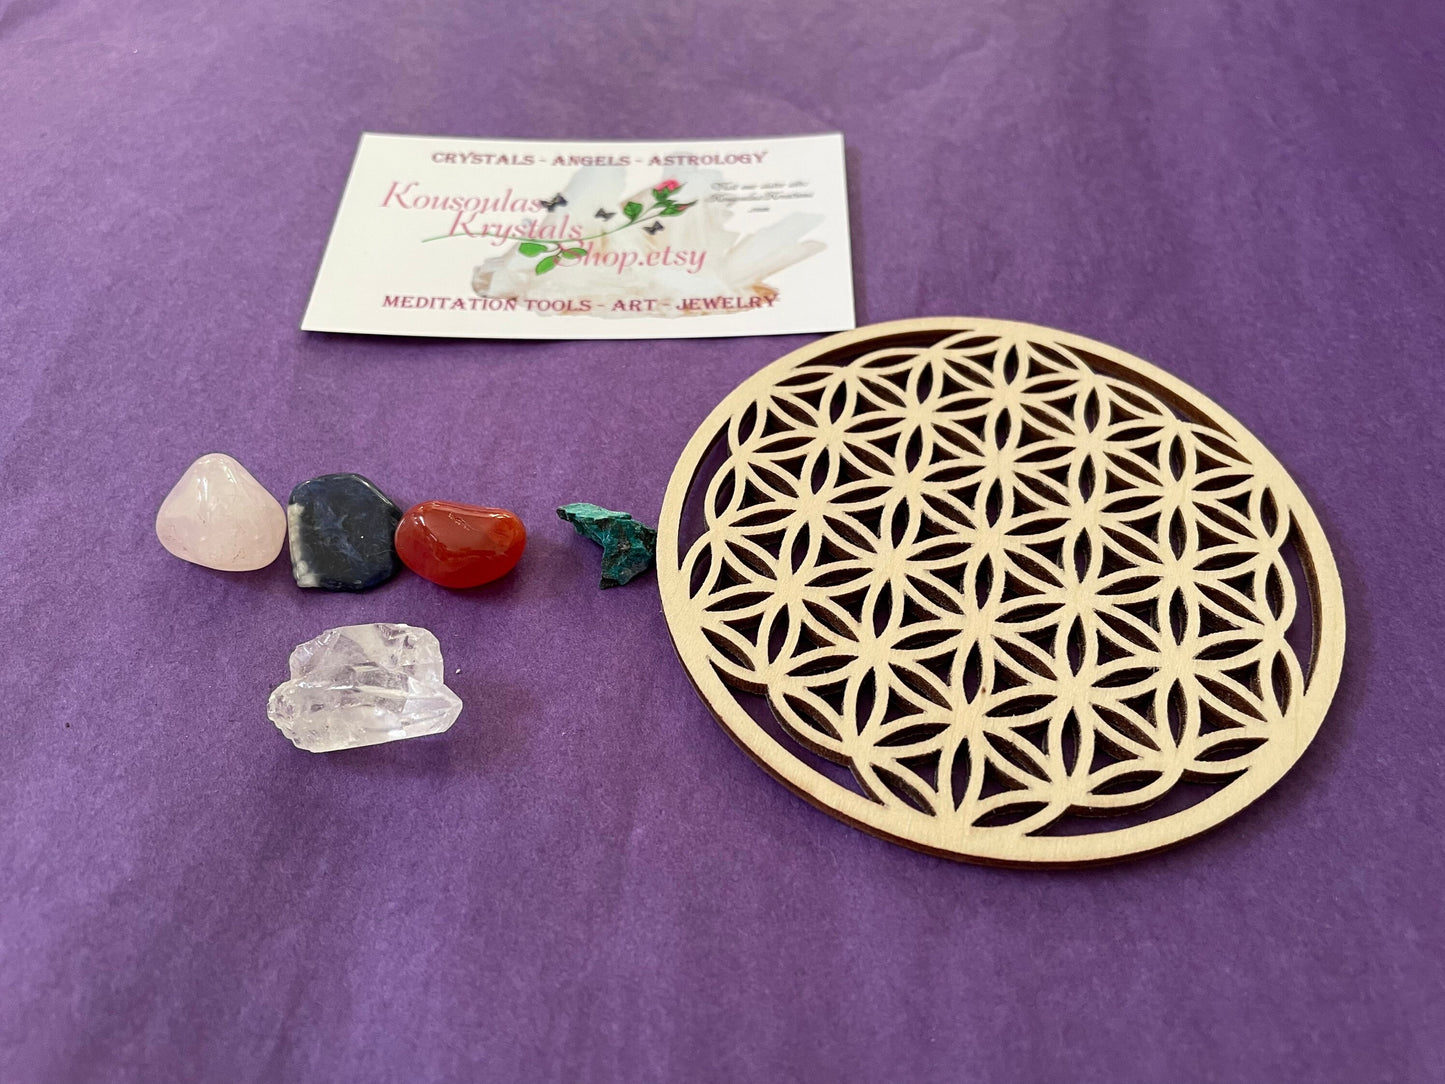 Let’s just admit it, the struggle is real!  This unique Parenting large stones crystal set & grid will assist with parenting and pregnancy!